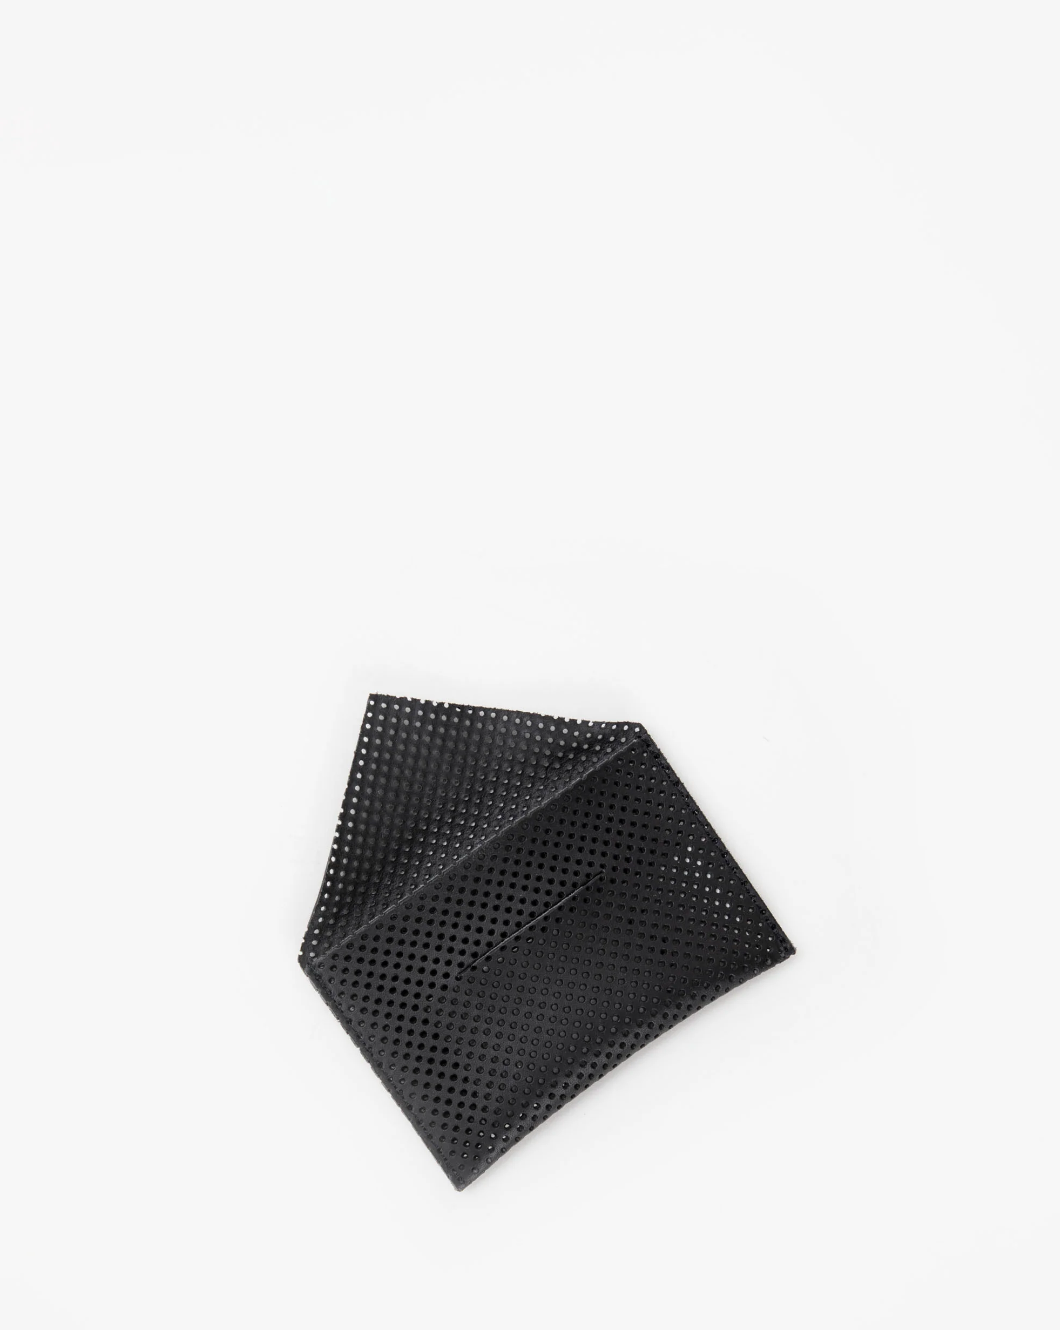 CARD ENVELOPE BAG IN PERFORATED BLACK - Romi Boutique